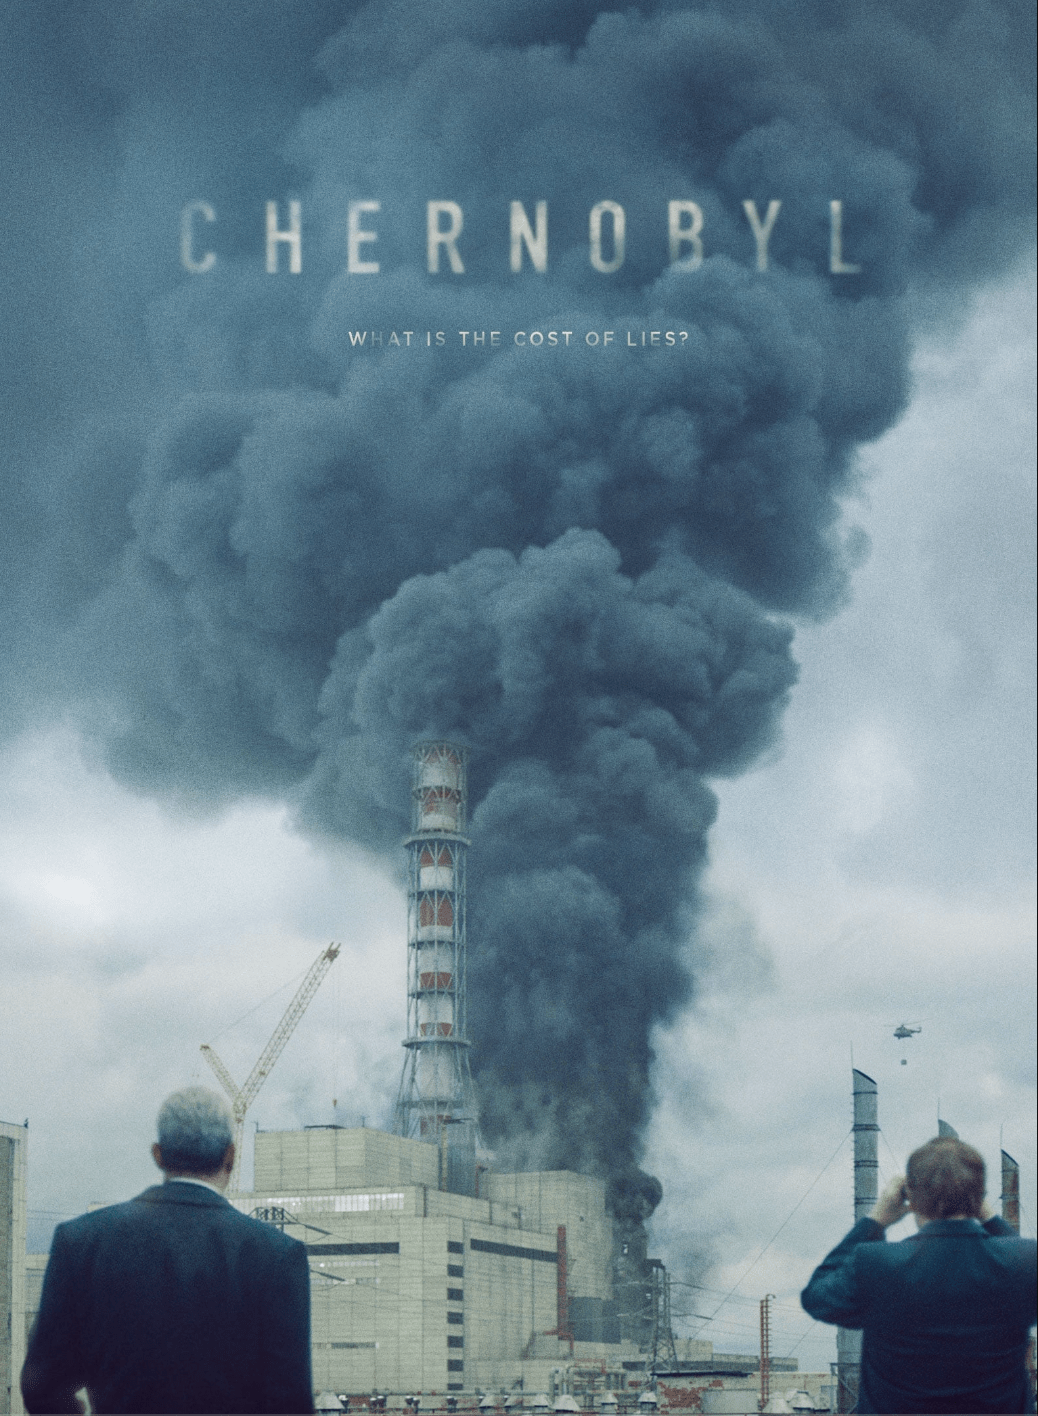 the cover of chernobyl shows smoke rising up from the nuclear power plant explotion